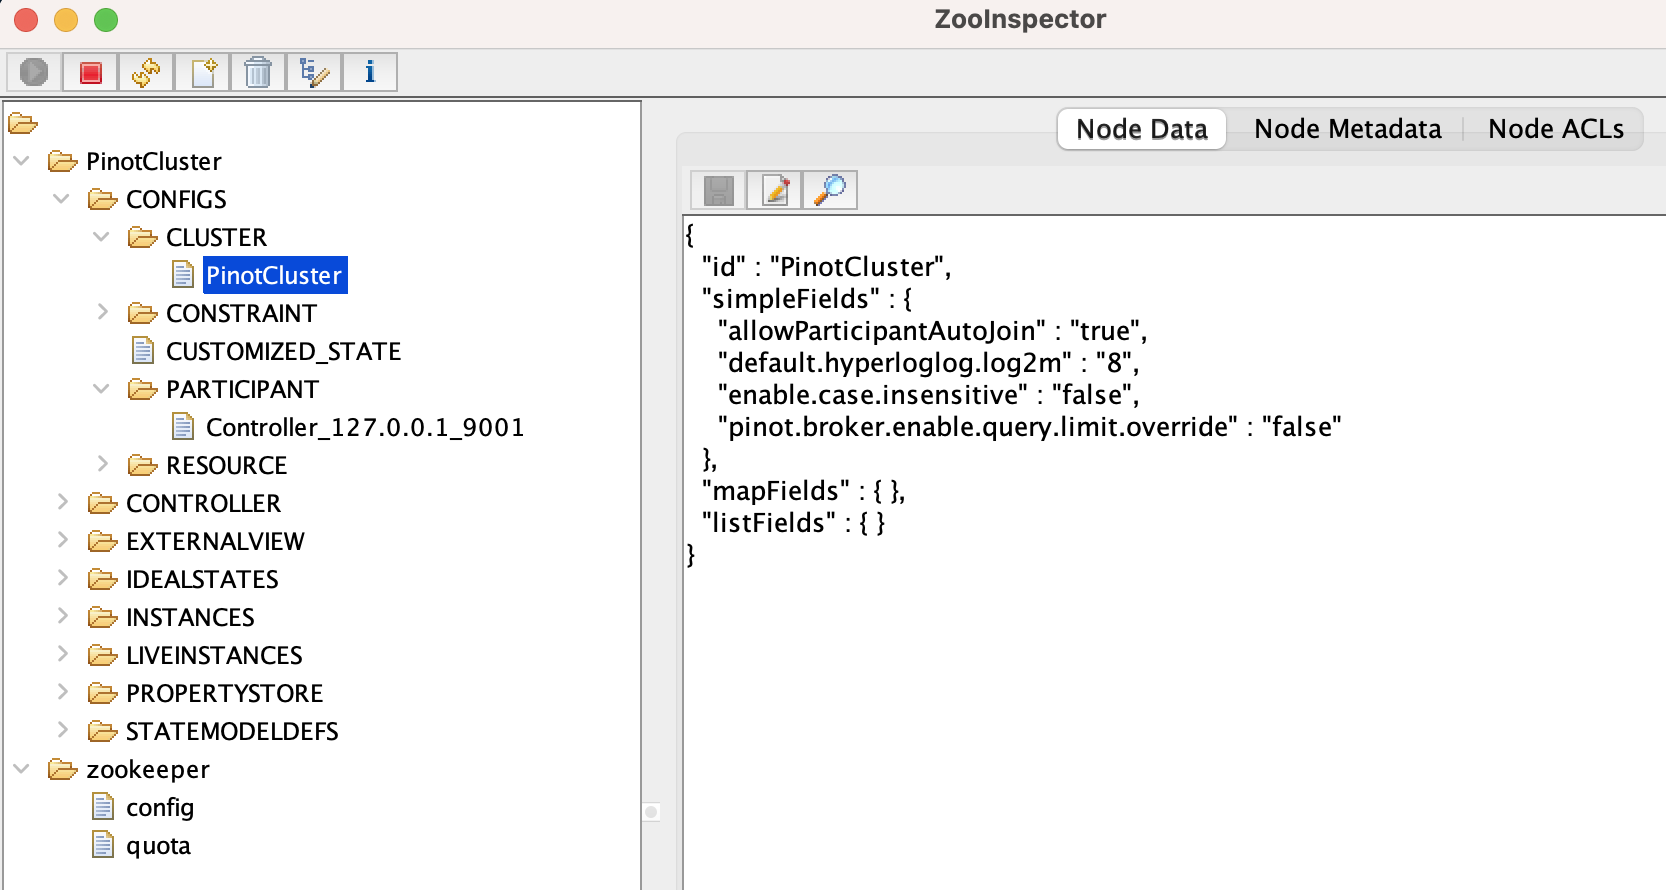 ZooInspector Tool: New Cluster, PinotCluster is showing up